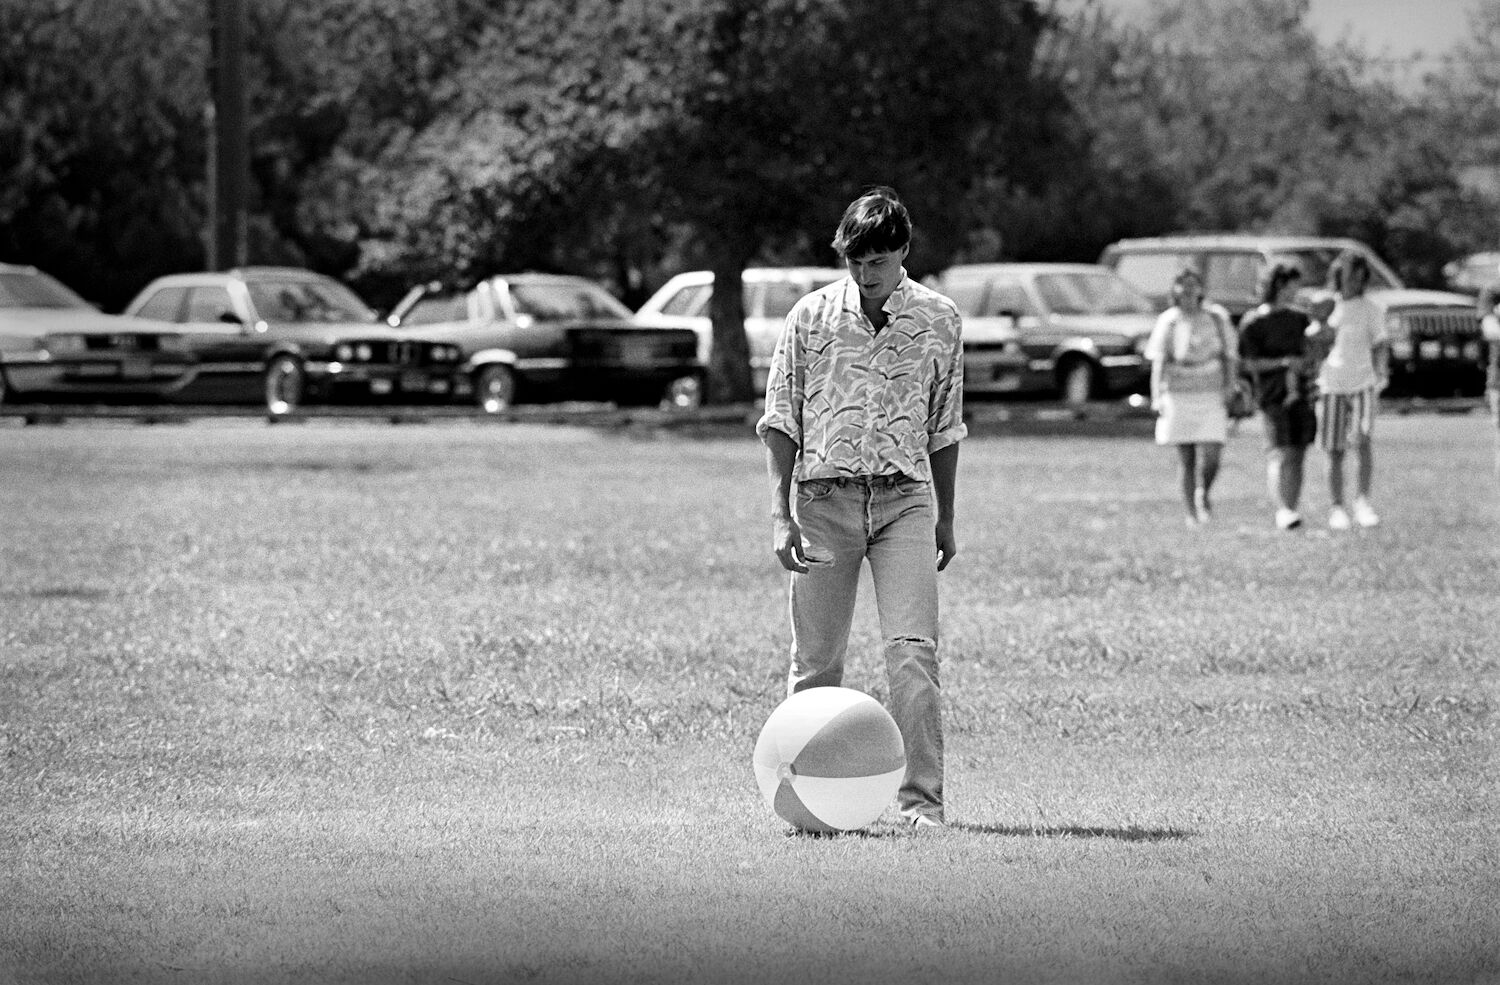 Steve kicks a beach ball in a grassy park. He is dressed in ripped jeans and a patterned shirt with rolled-up sleeves.